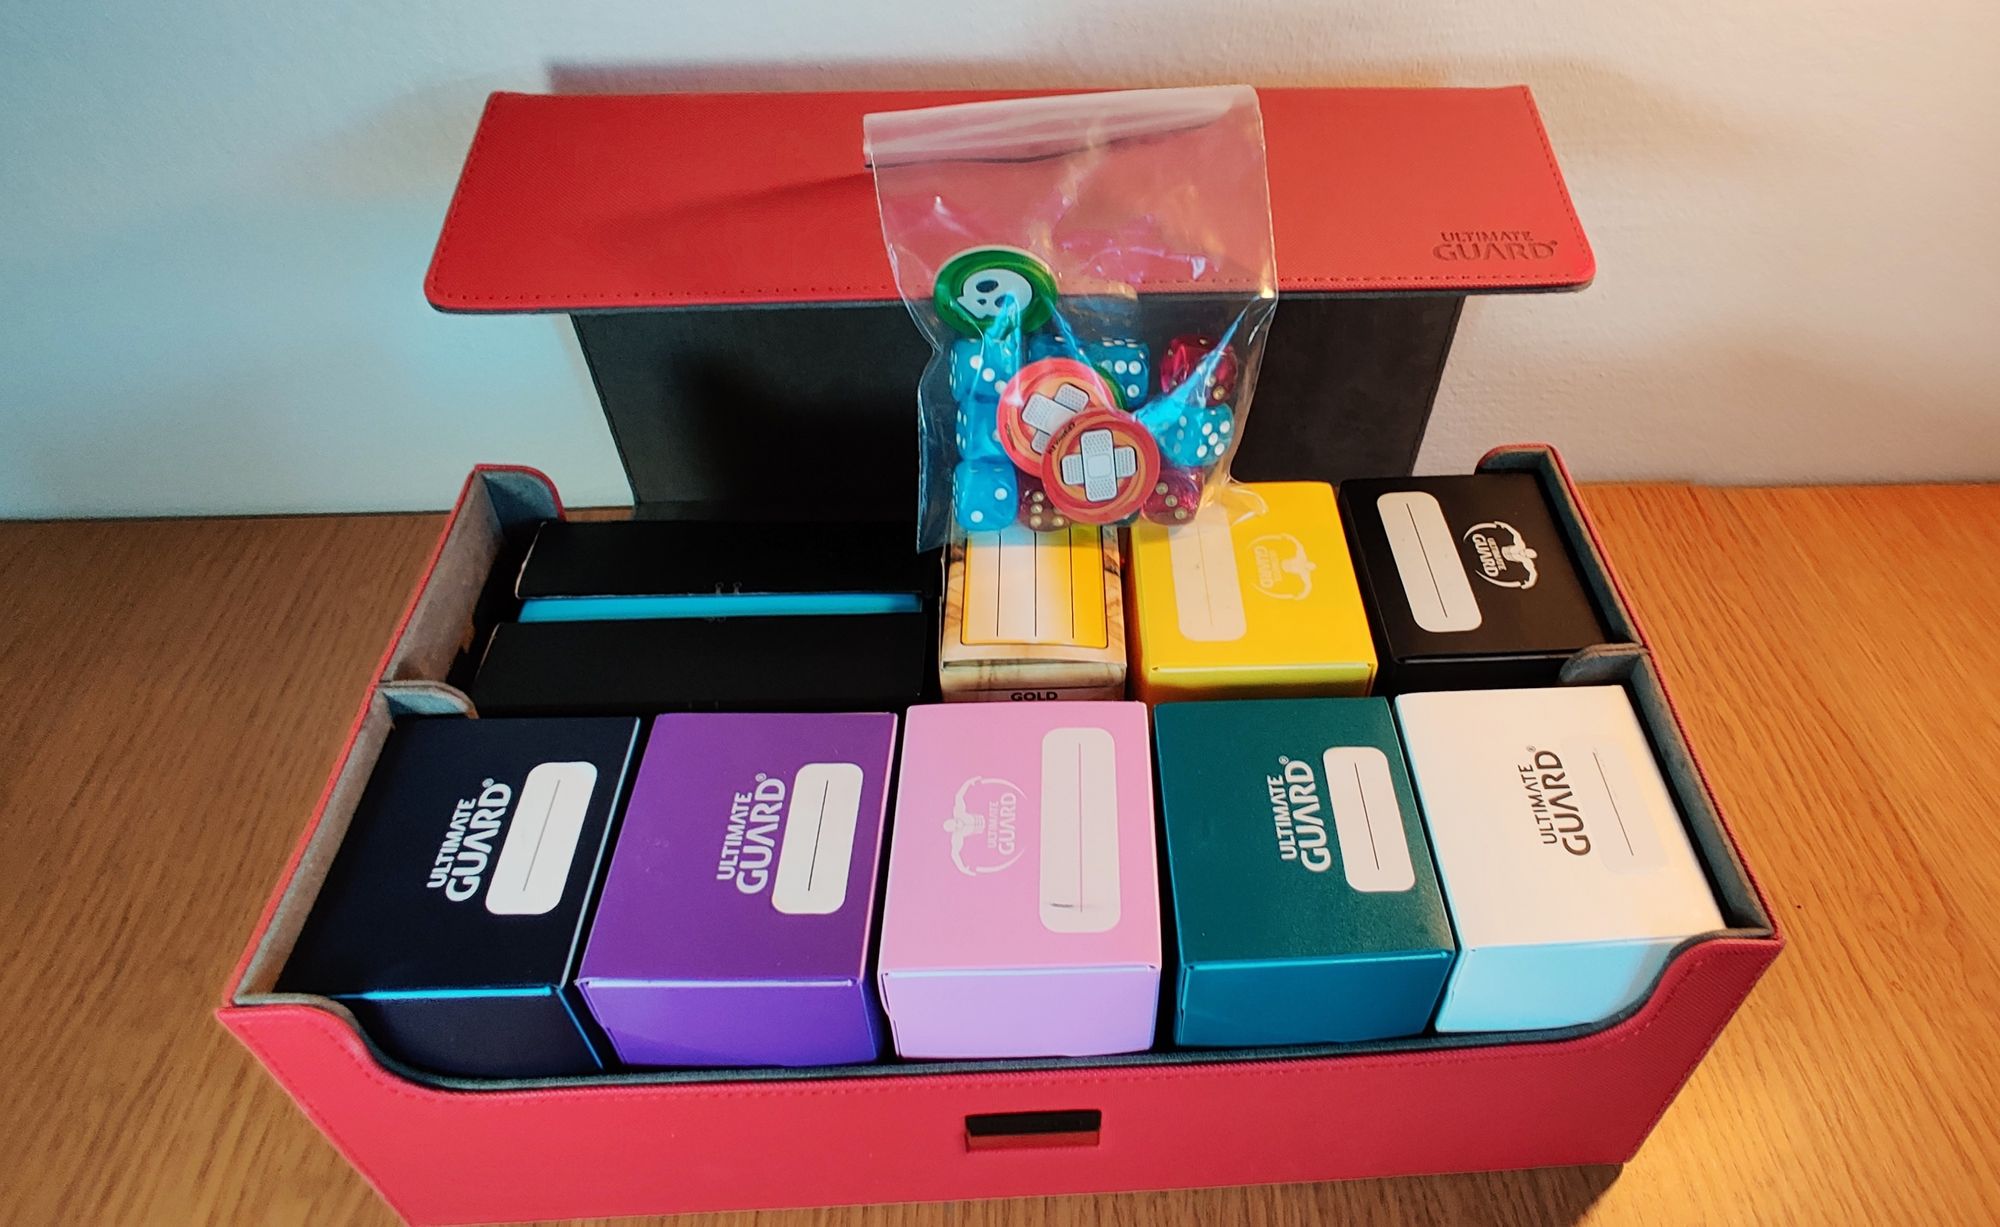 A large red box with open lid and 9 small deck boxes of games inside